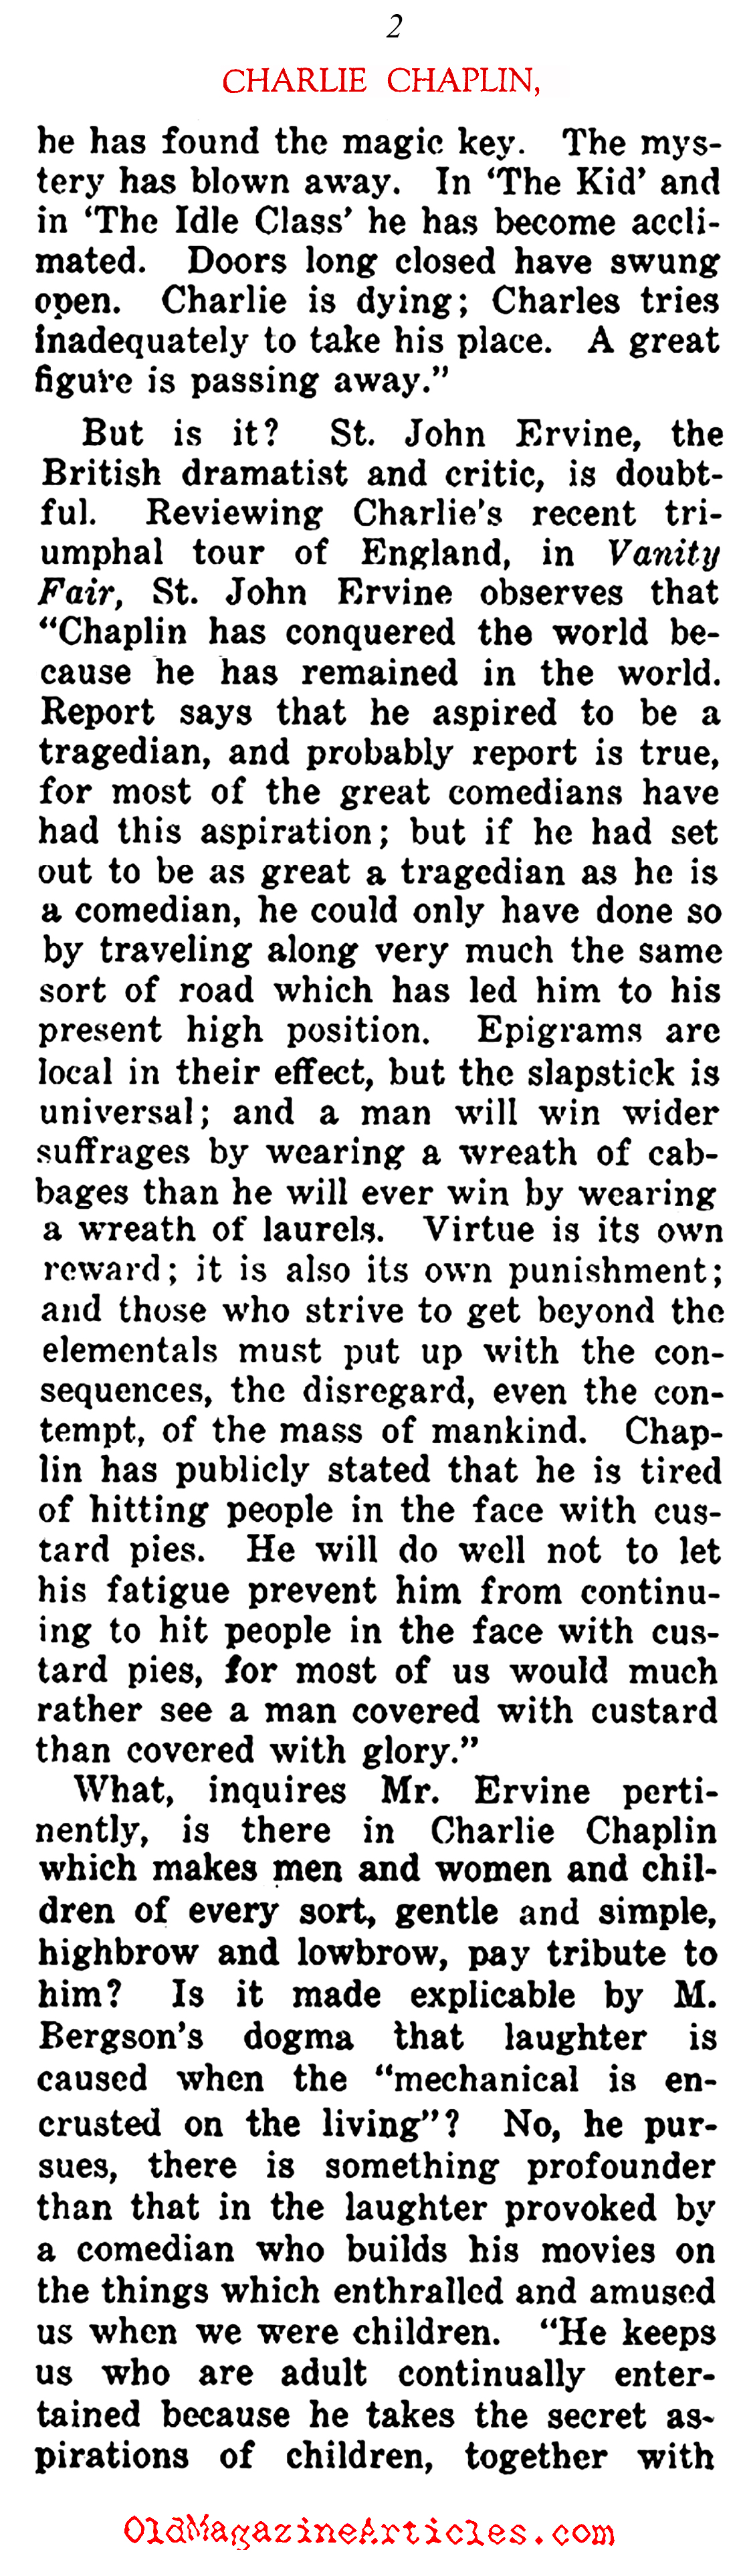 Charlie Chaplin Wanted to be Taken Seriously (Current Opinion, 1922)